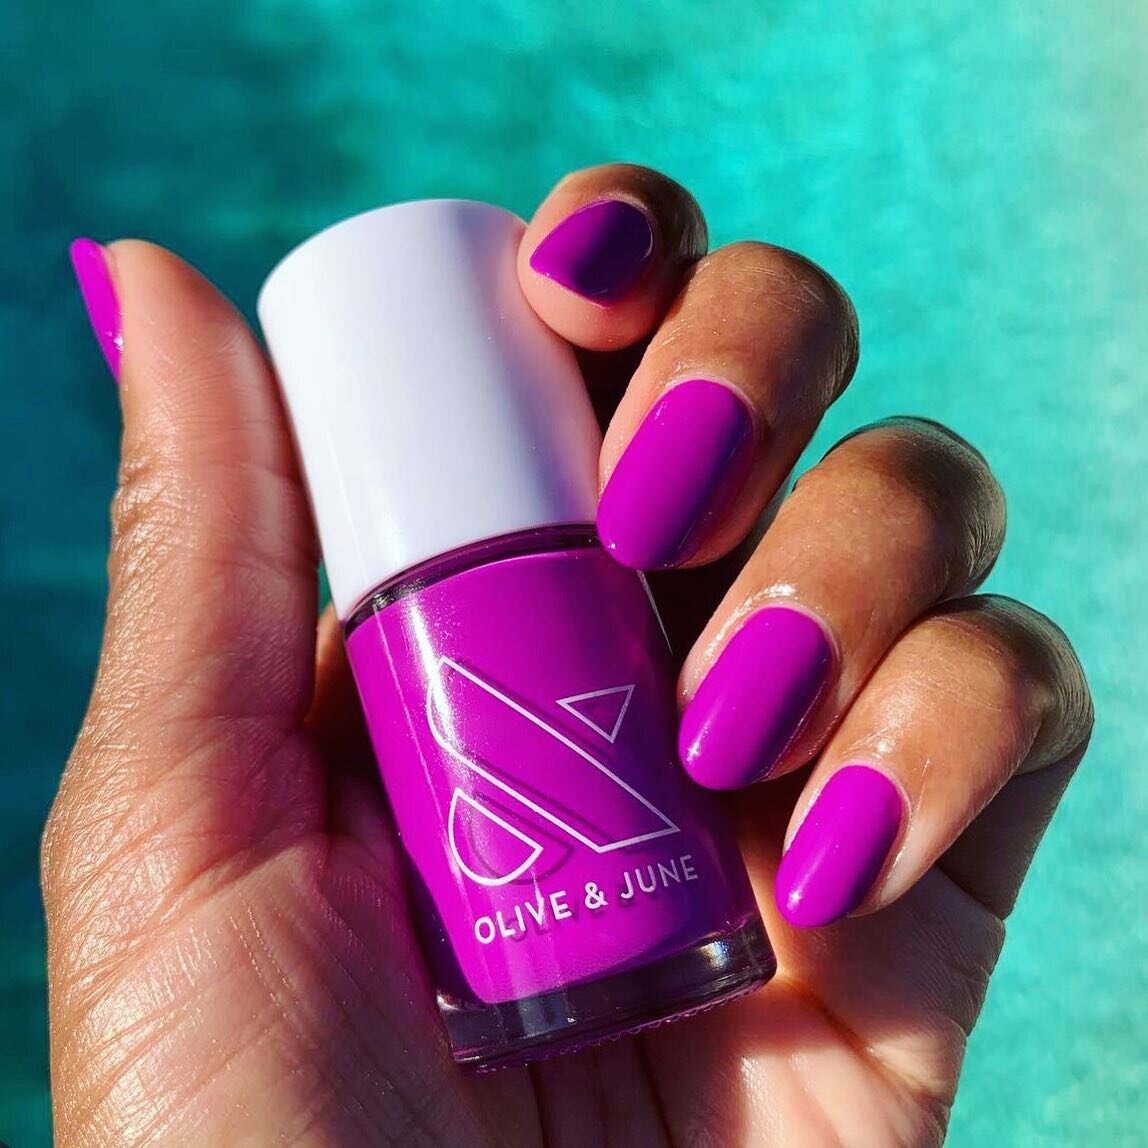 Are You A Nudie Or Color Lover On Your Nails 💅🏿?
⠀⠀⠀⠀⠀⠀⠀⠀⠀
☀️Summer☀️ Is Almost Here And We Love Seeing All Nail Trends From IG To TikTok. 
There Is Just Something About Freshly Manicured Nails That Adds A Little Pep In Our Step. 
⠀⠀⠀⠀⠀⠀⠀⠀⠀
However